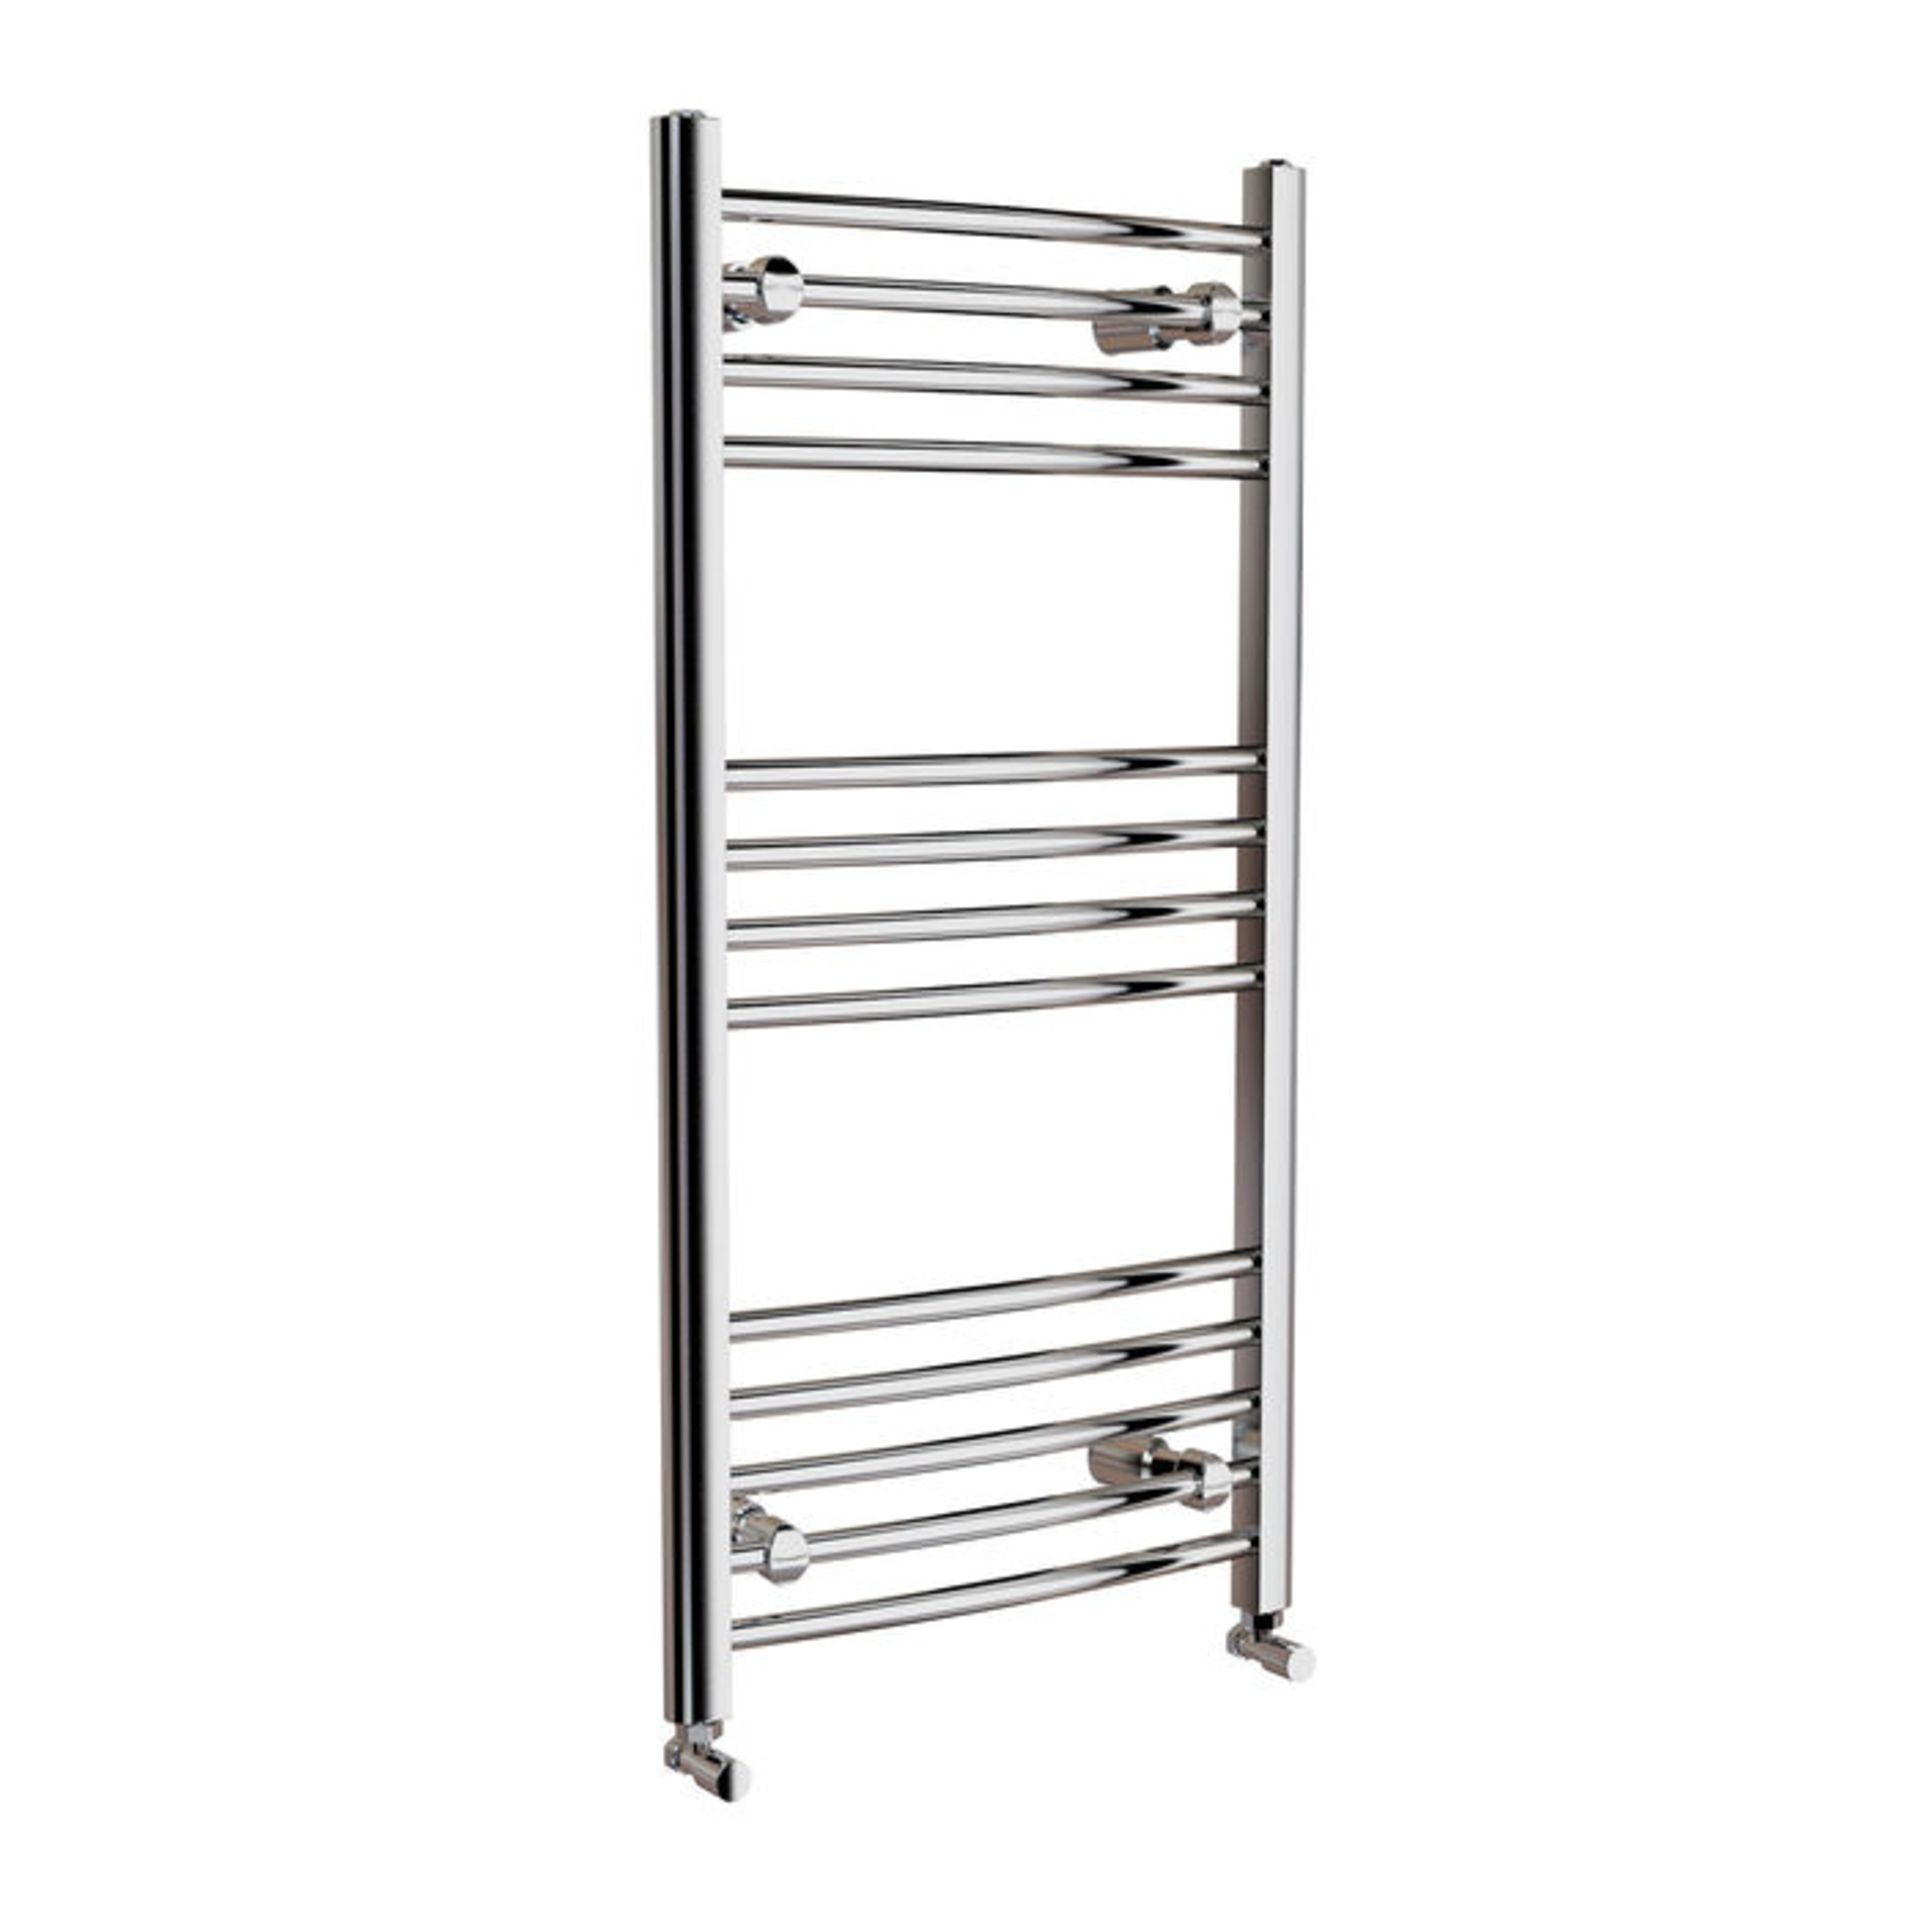 (Z168) 1000x500mm - 20mm Tubes - Chrome Curved Rail Ladder Towel Radiator. Low carbon steel chrome - Image 5 of 5